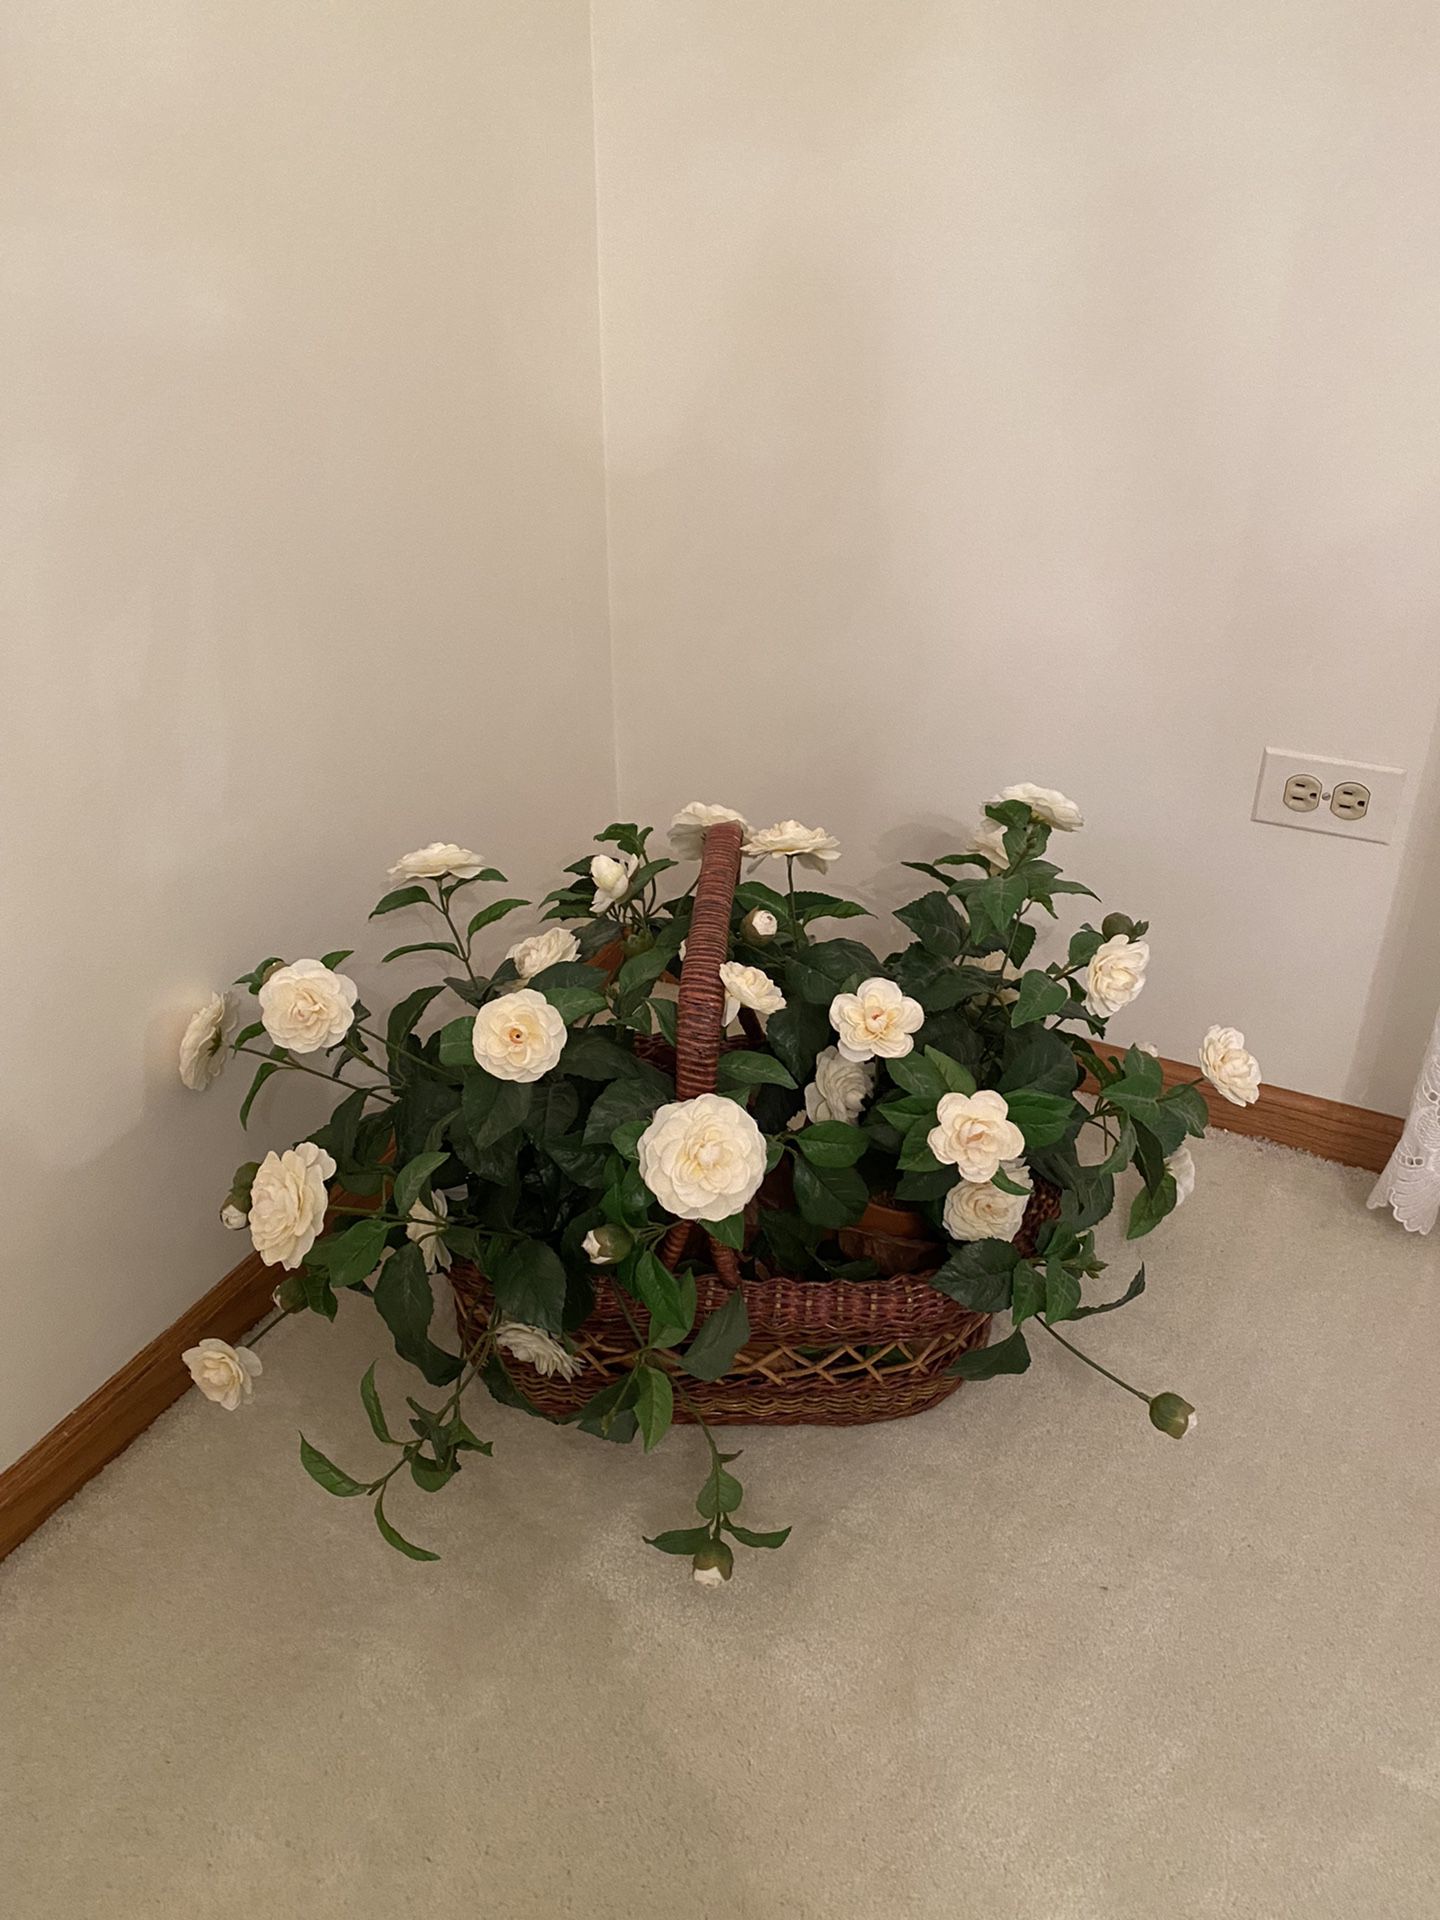 Basket With 2 Flower Pots And Artificial Flowers